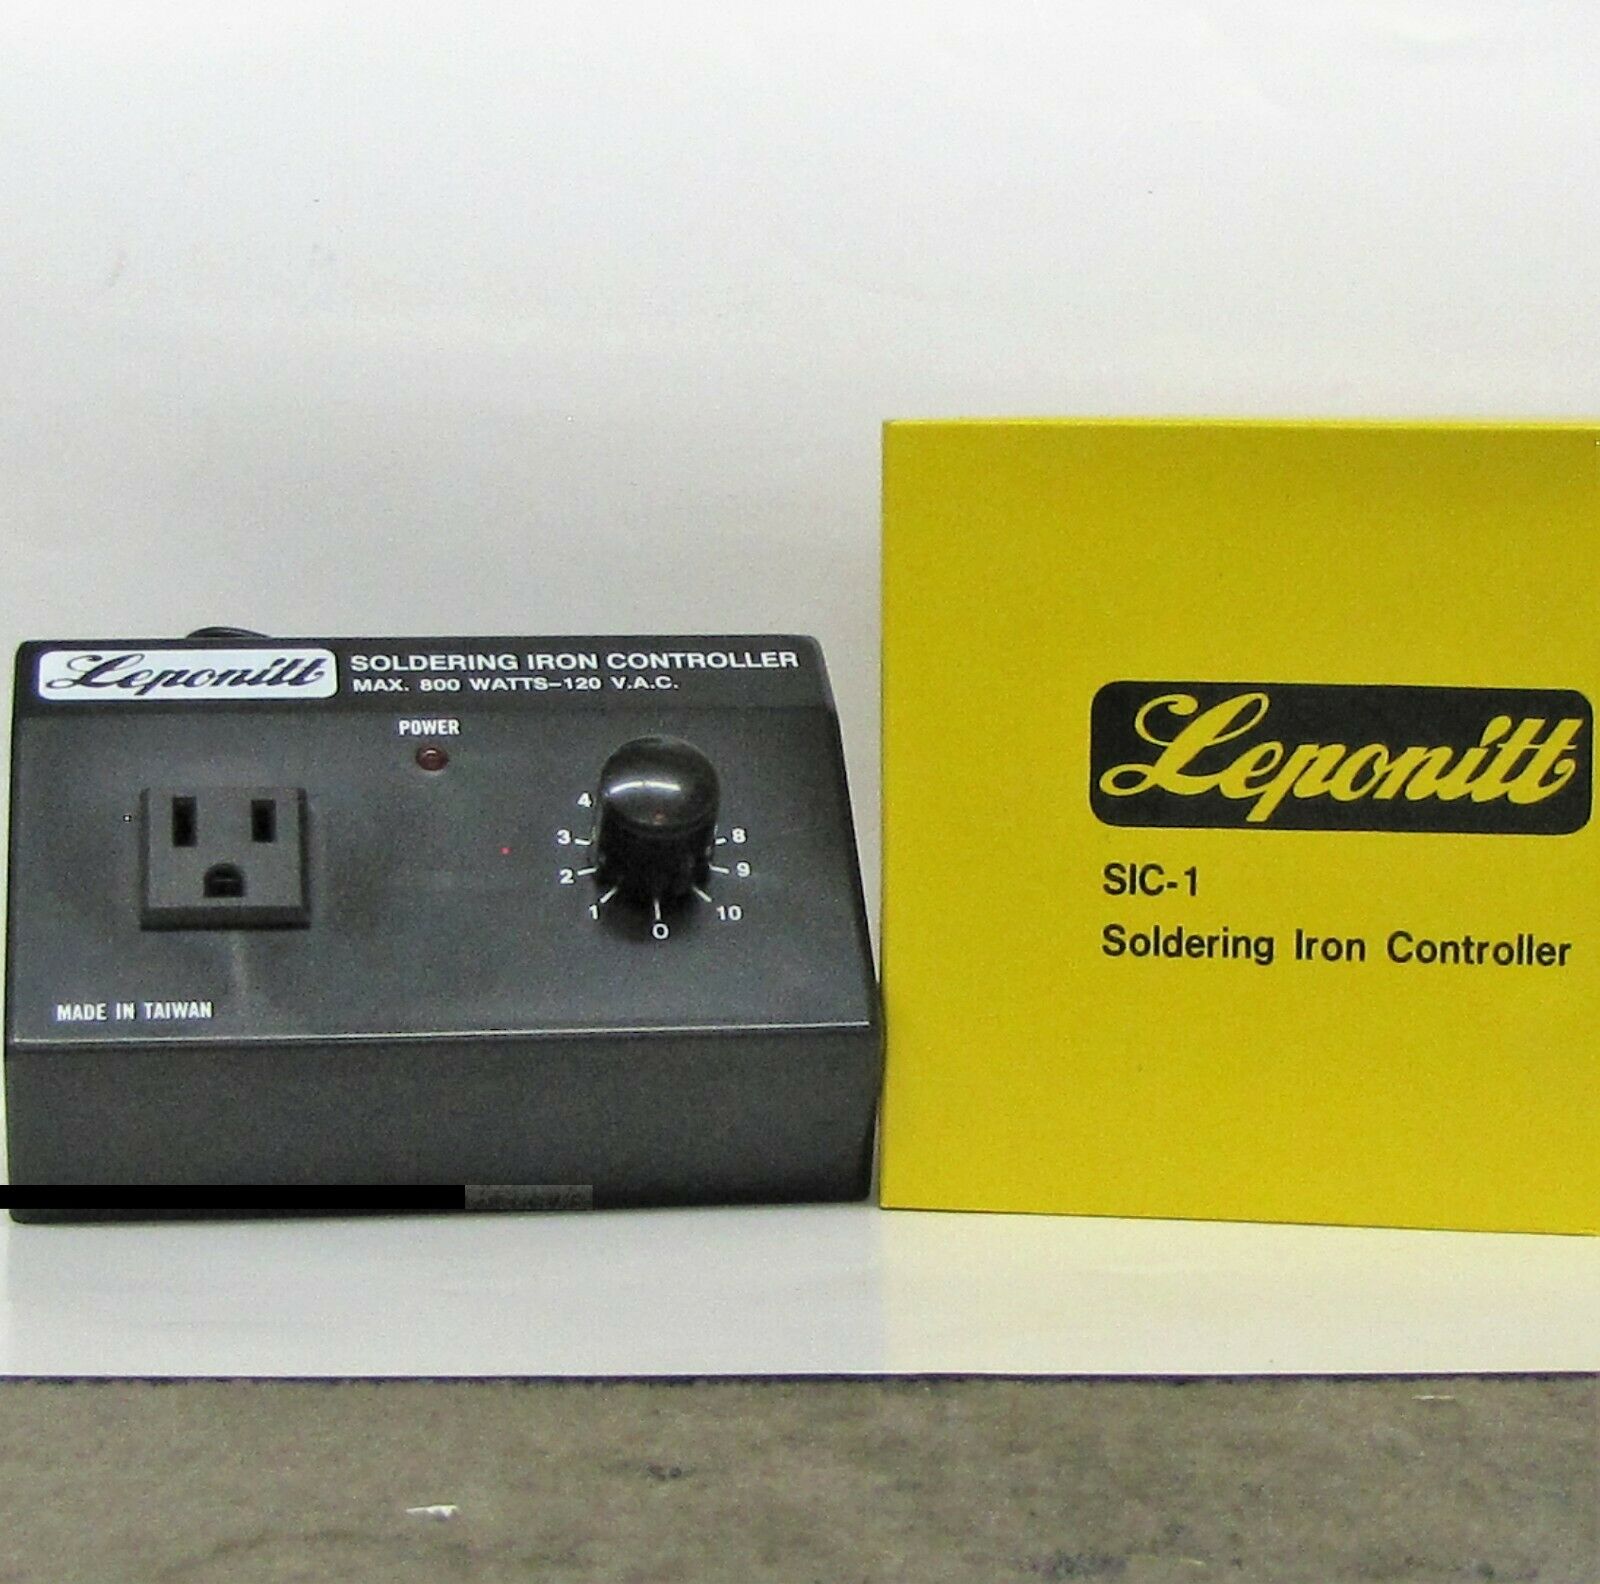 Leponitt Rheostat Soldering Iron Temperature Control For Irons Up To 800 Watts